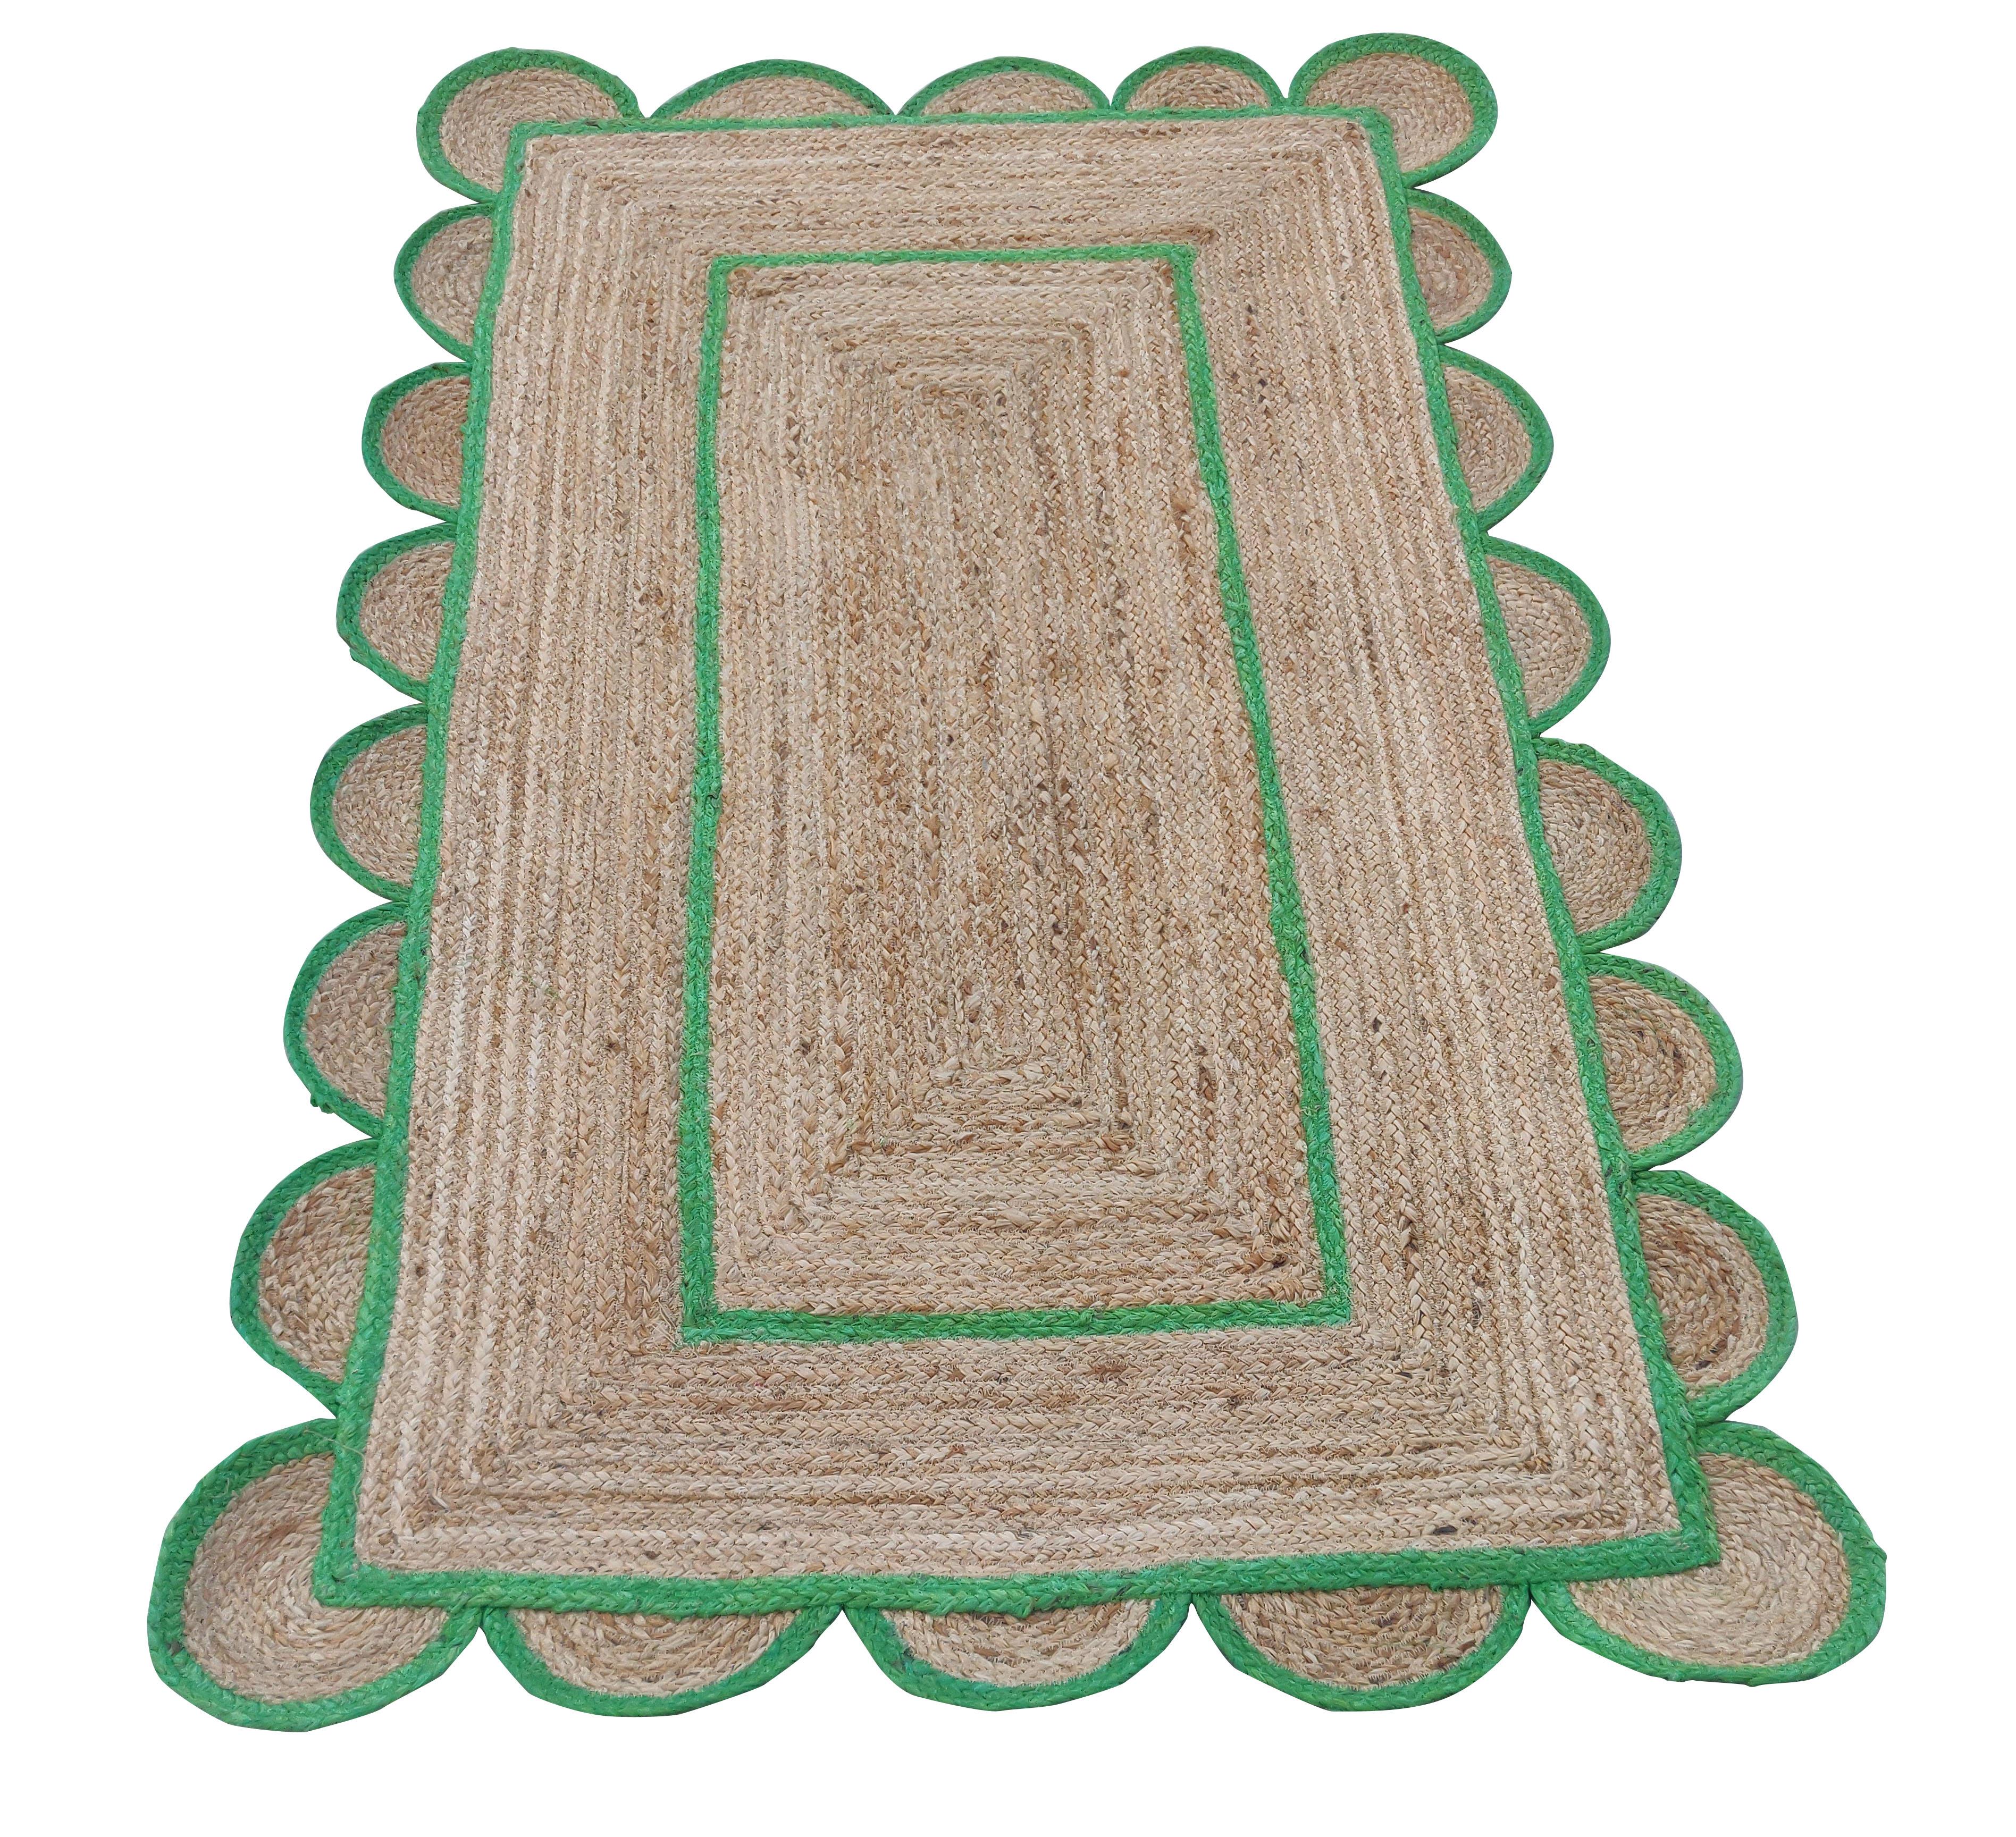 Handmade Jute Scalloped Rug, Natural Jute and Green Dhurrie -3'x5'

These special flat-weave dhurries are hand-woven with 15 ply 100% cotton yarn. Due to the special manufacturing techniques used to create our rugs, the size and color of each piece